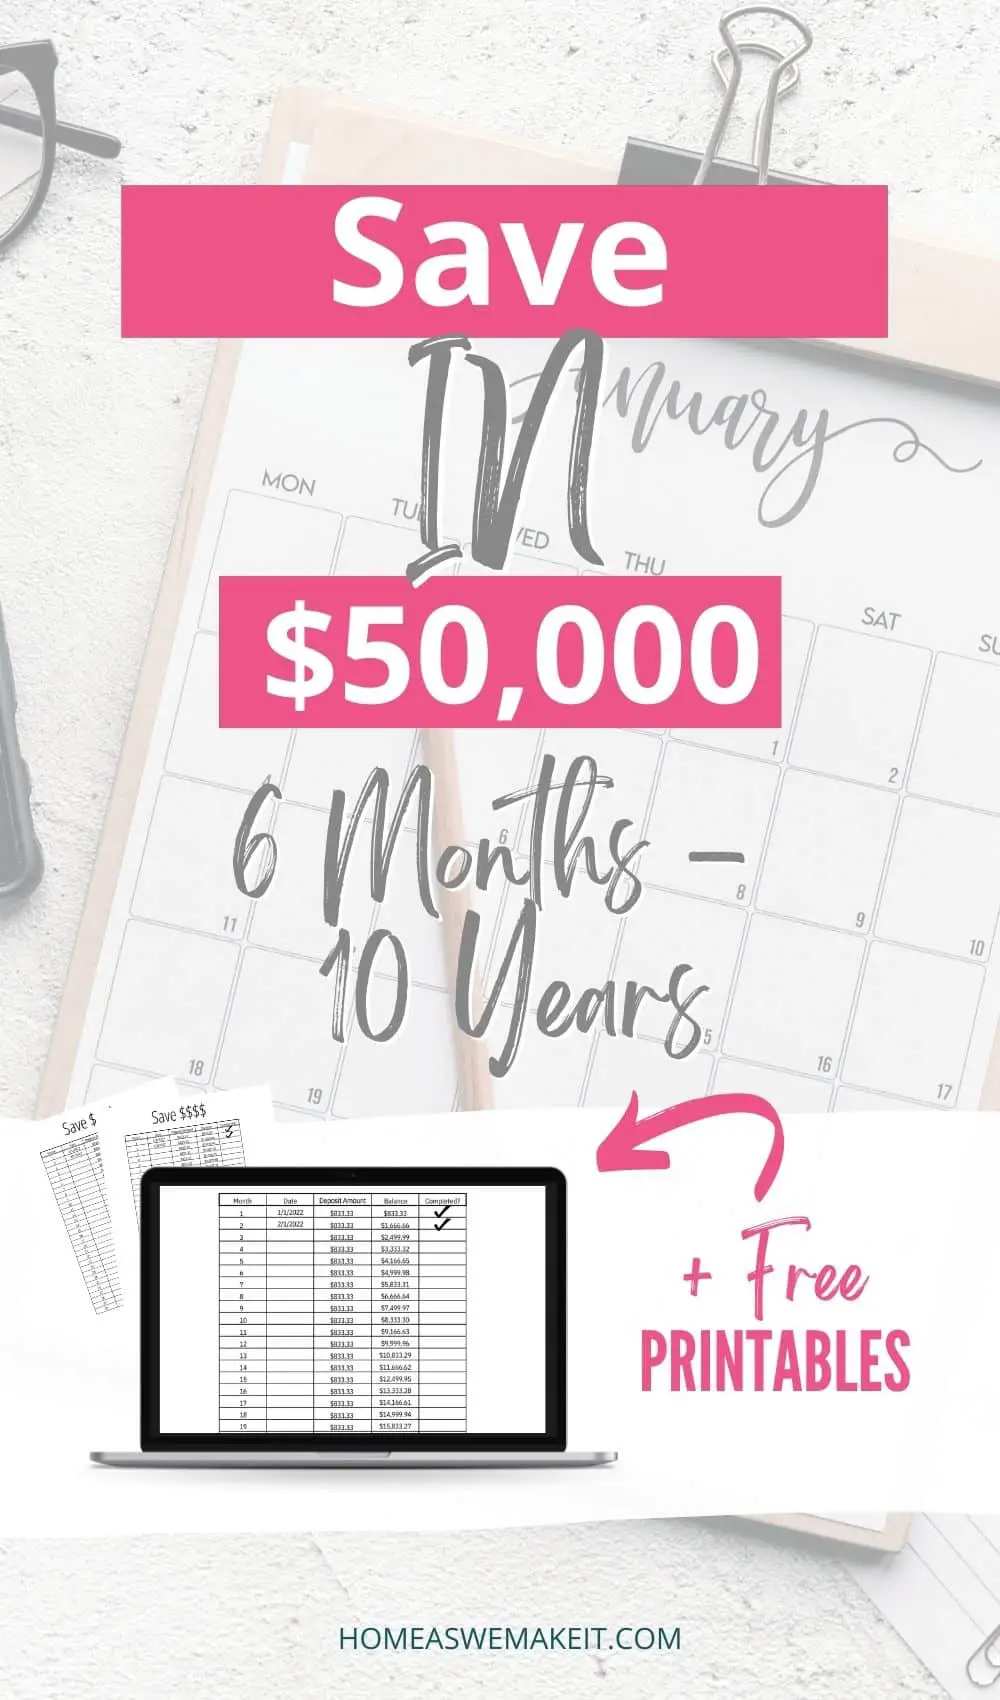 How to Save $50,000 with Money Saving Charts